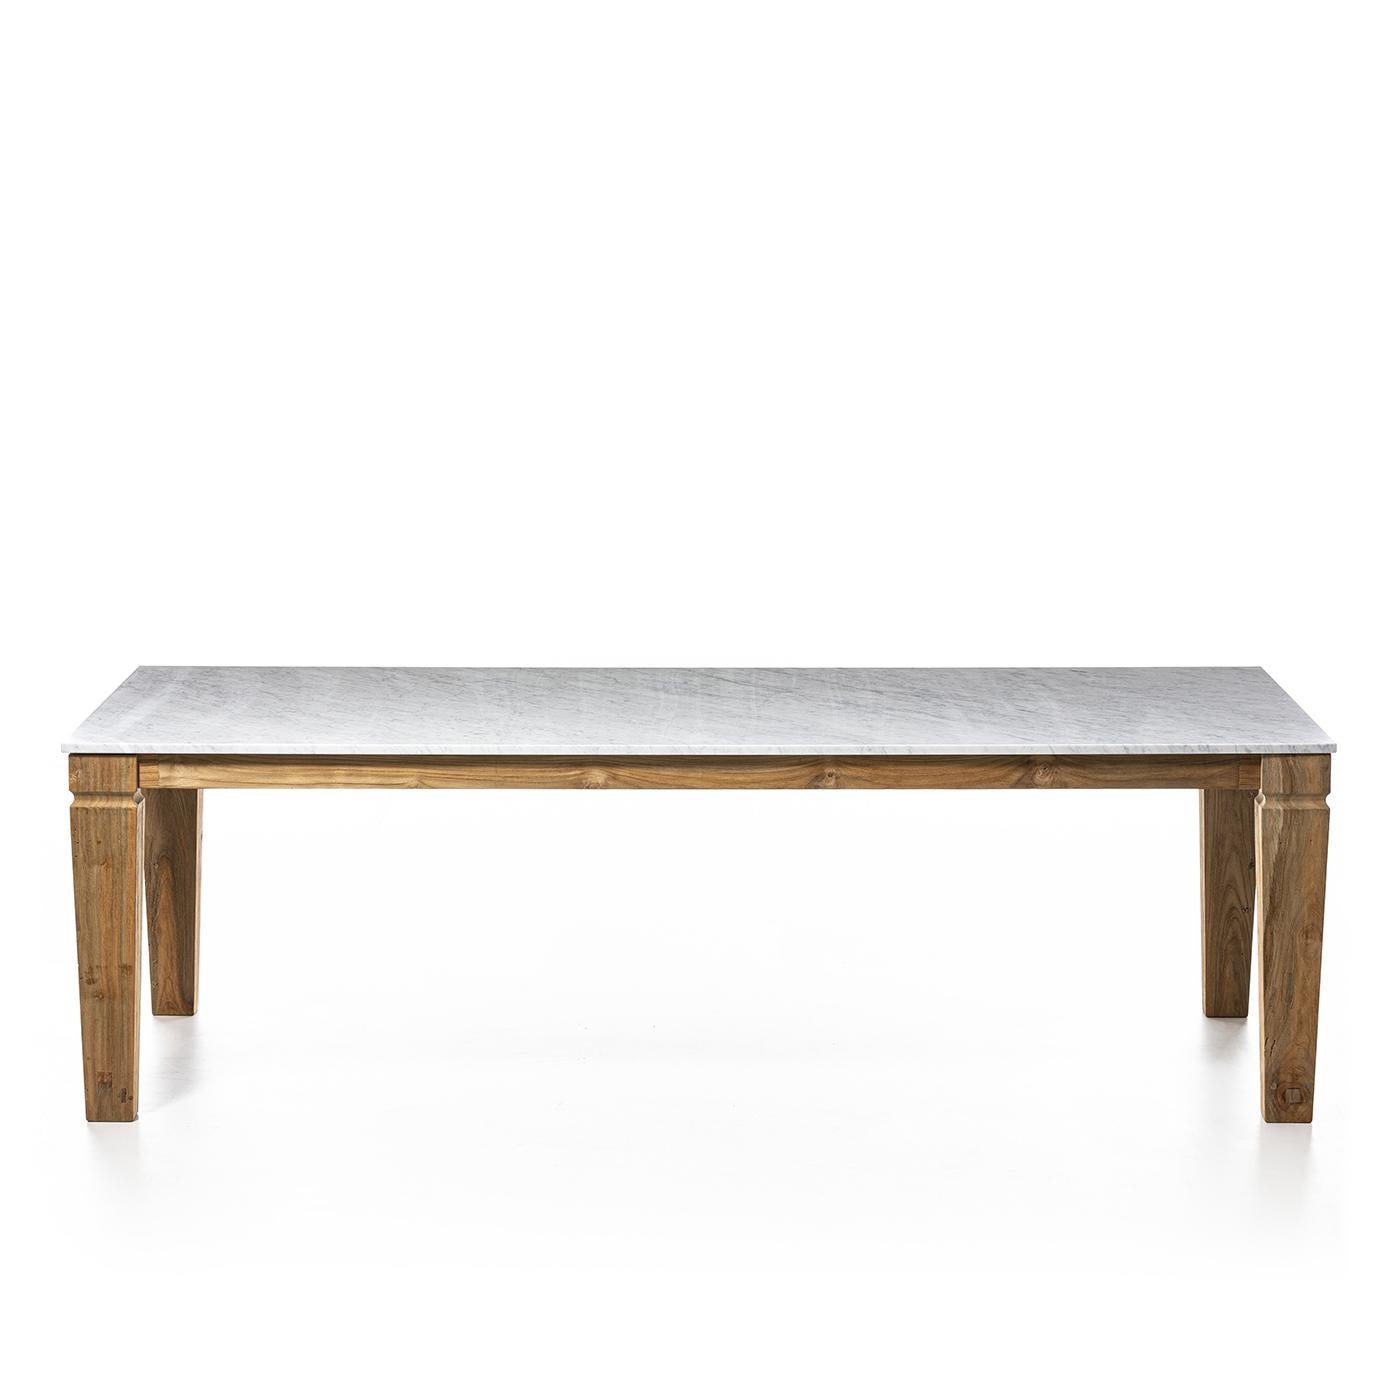 Dining table Barletta with white carrara marble top
and with solid teak wood. For outdoor or indoor use.